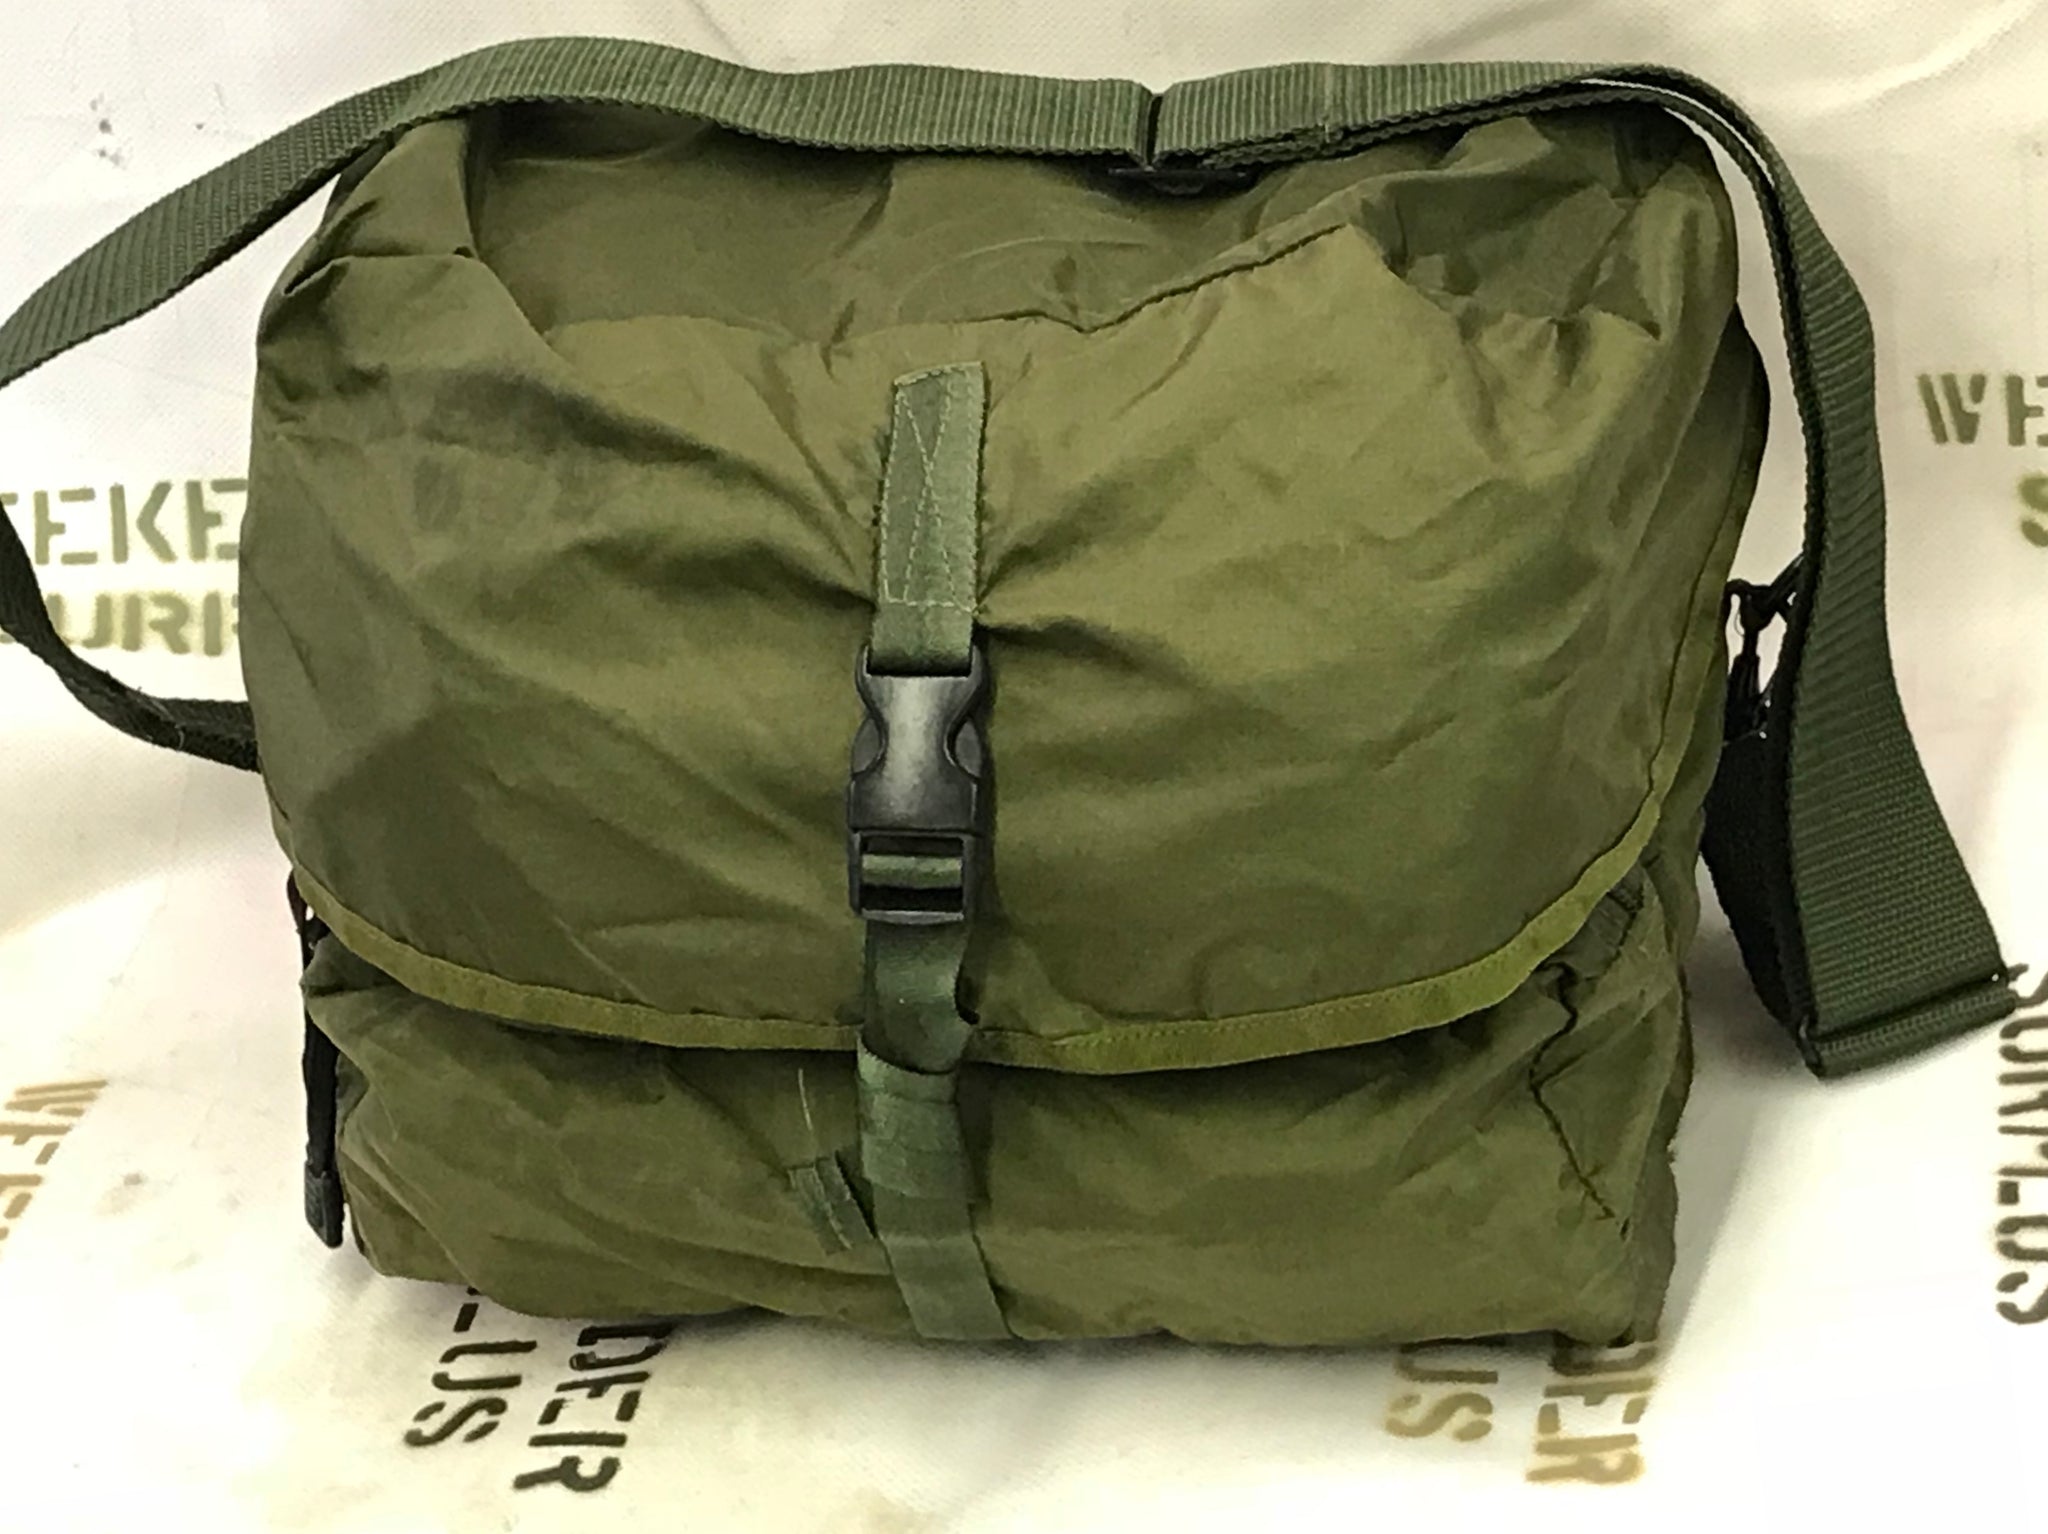 M3 MEDIC BAG 3 POUCH COMPARTMENT USGI ARMY ISSUE WITH STRAP -GRADE B ...